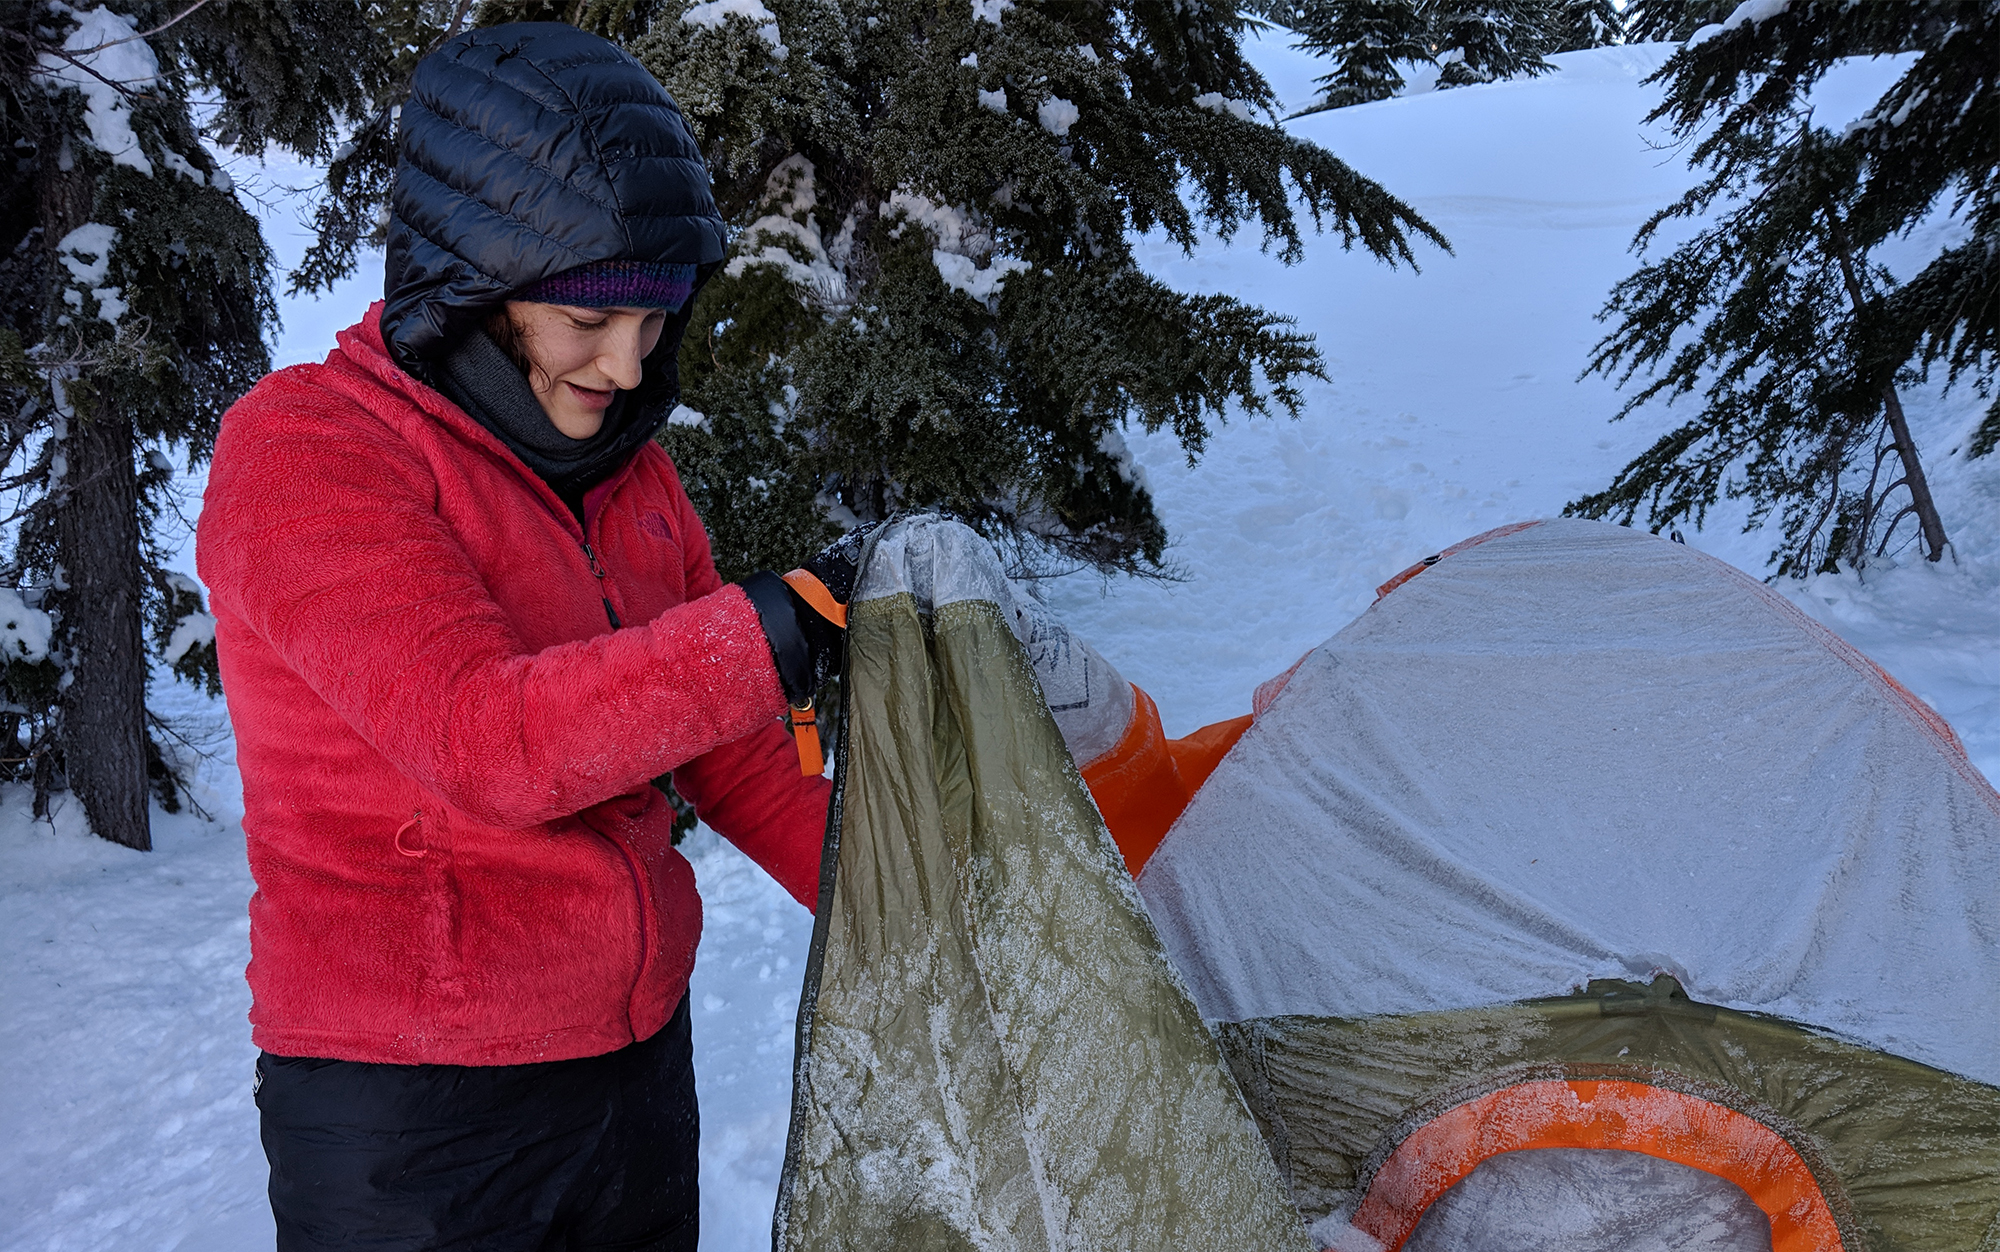 The North Face Osito provided extra warmth and moisture protection on an overnight snowshoe in the North Cascades.